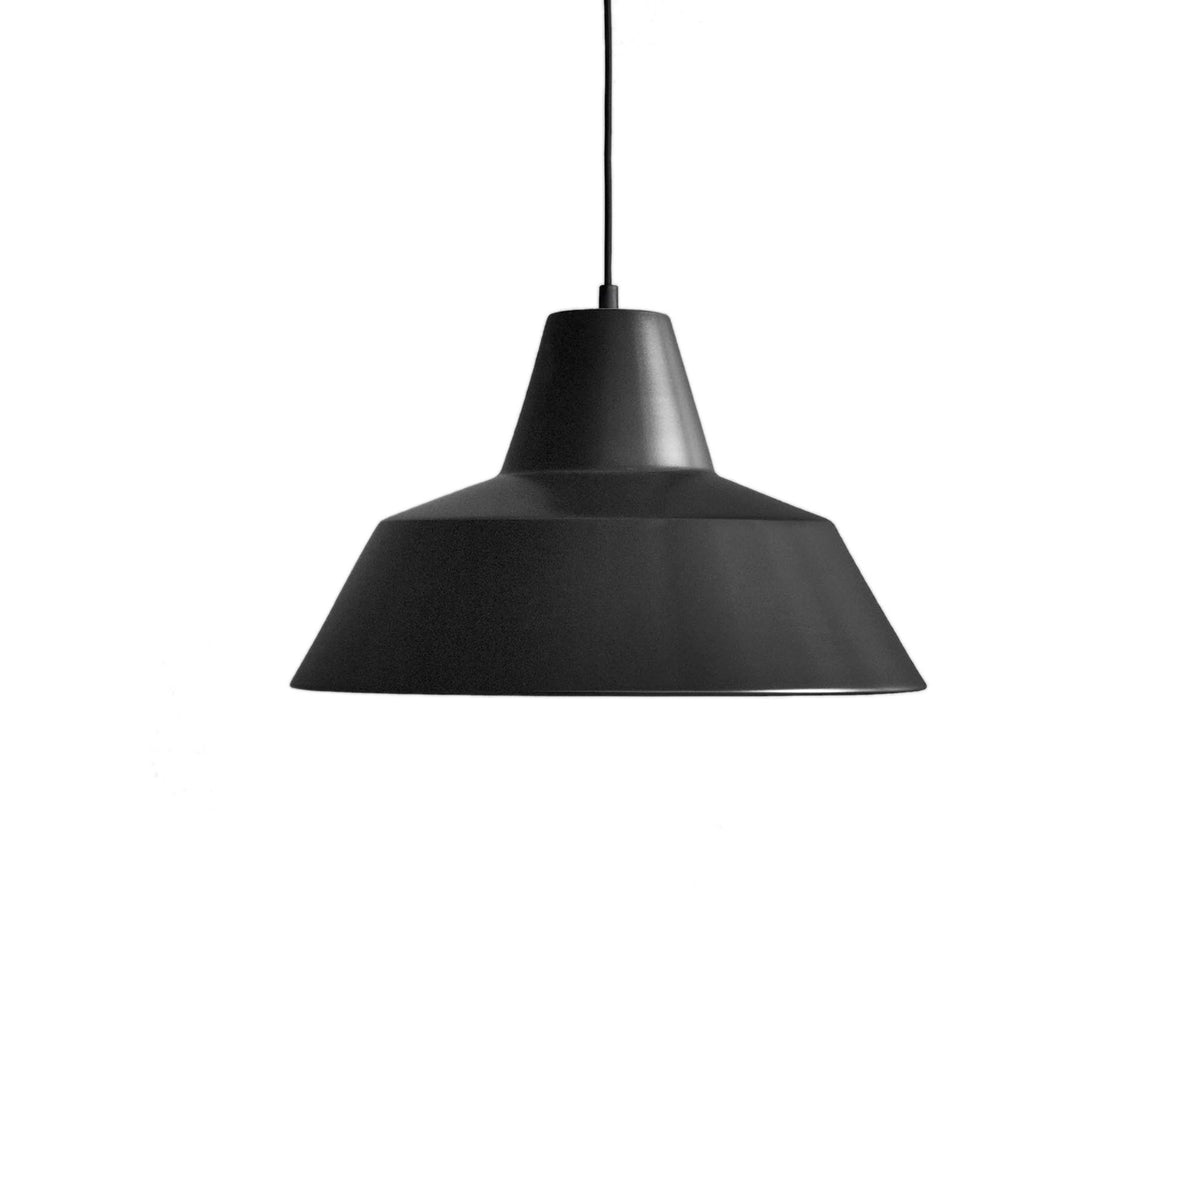 Made by Hand Workshop W4 Pendant in Matte Black by A Wedel Madsen